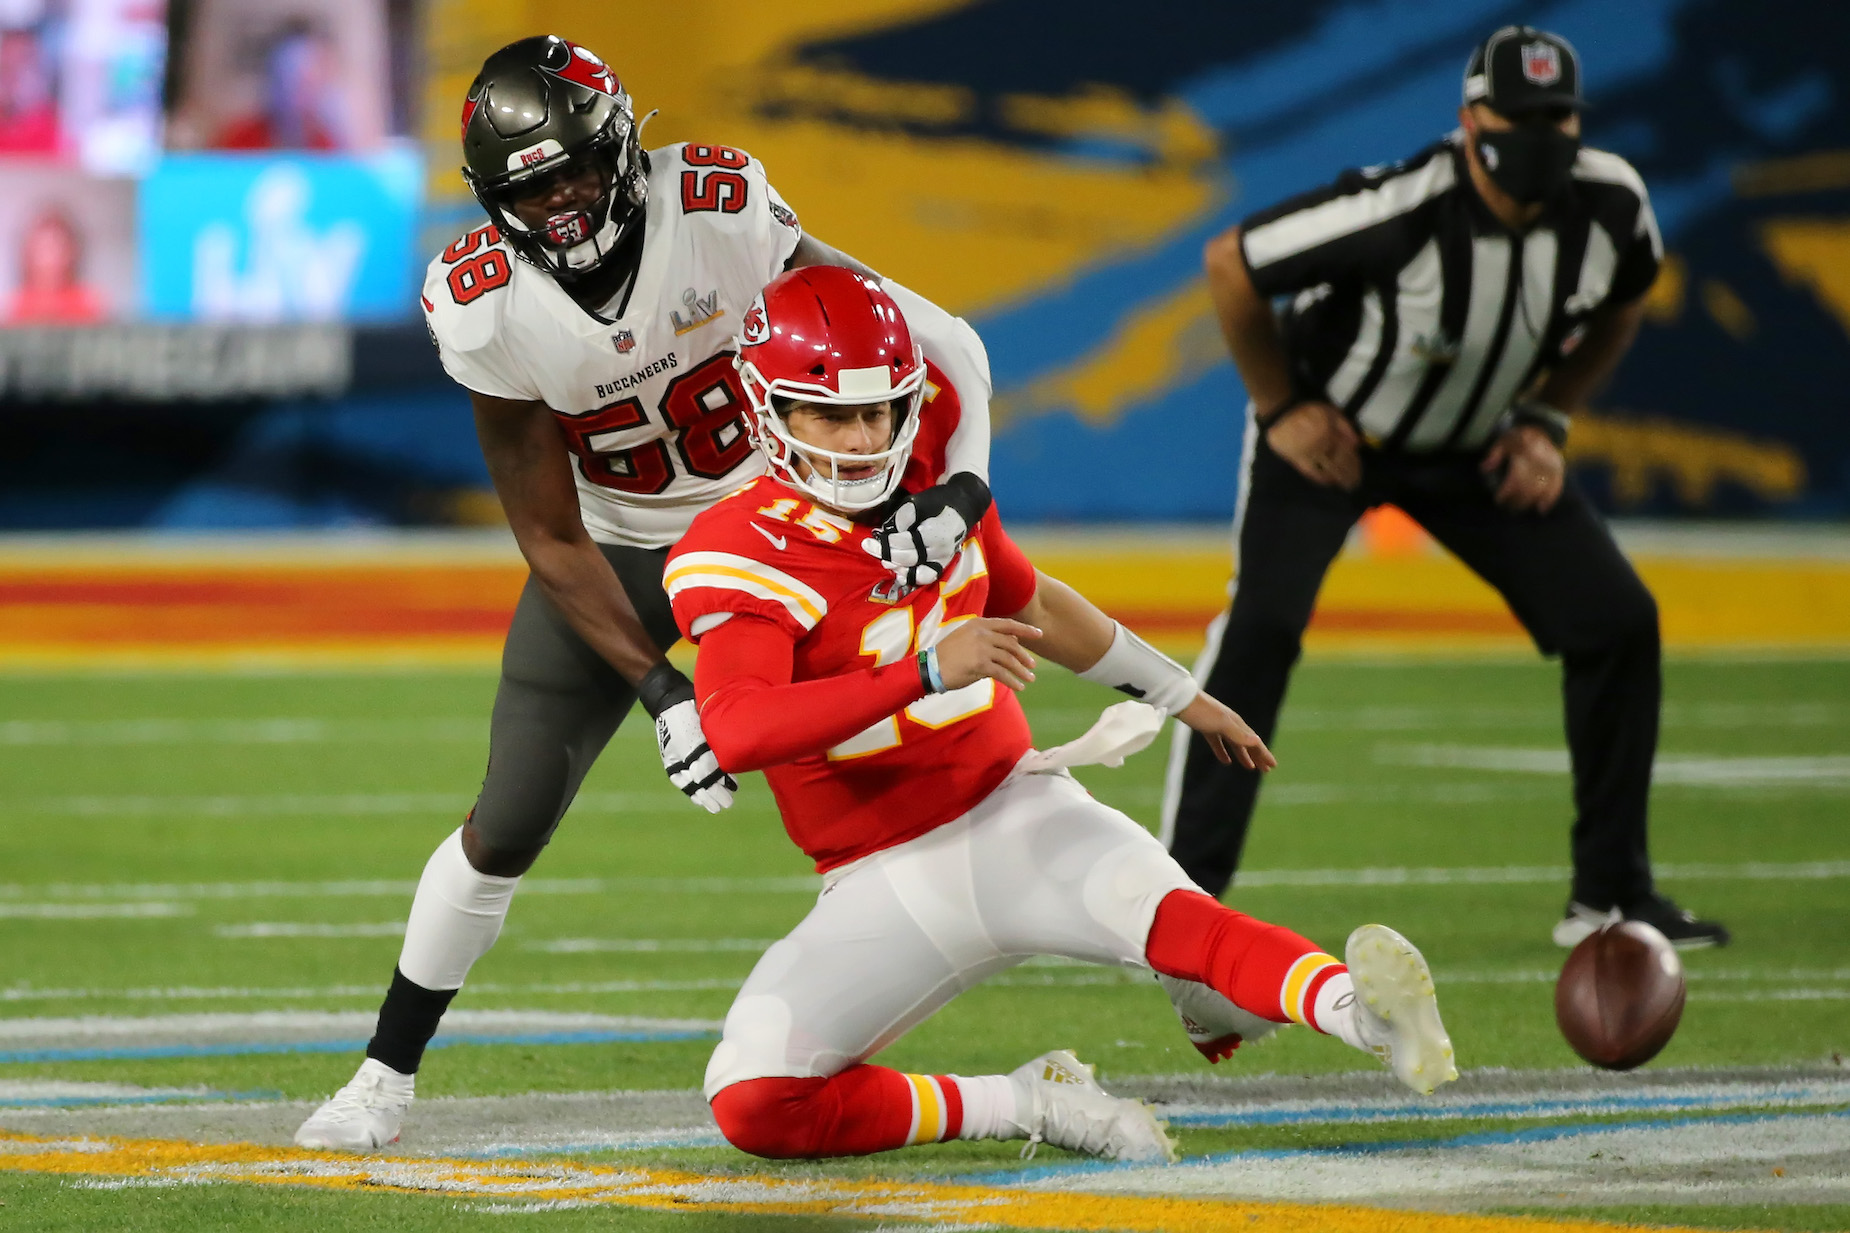 Patrick Mahomes of the Kansas City Chiefs is taken to the ground during Super Bowl 55.